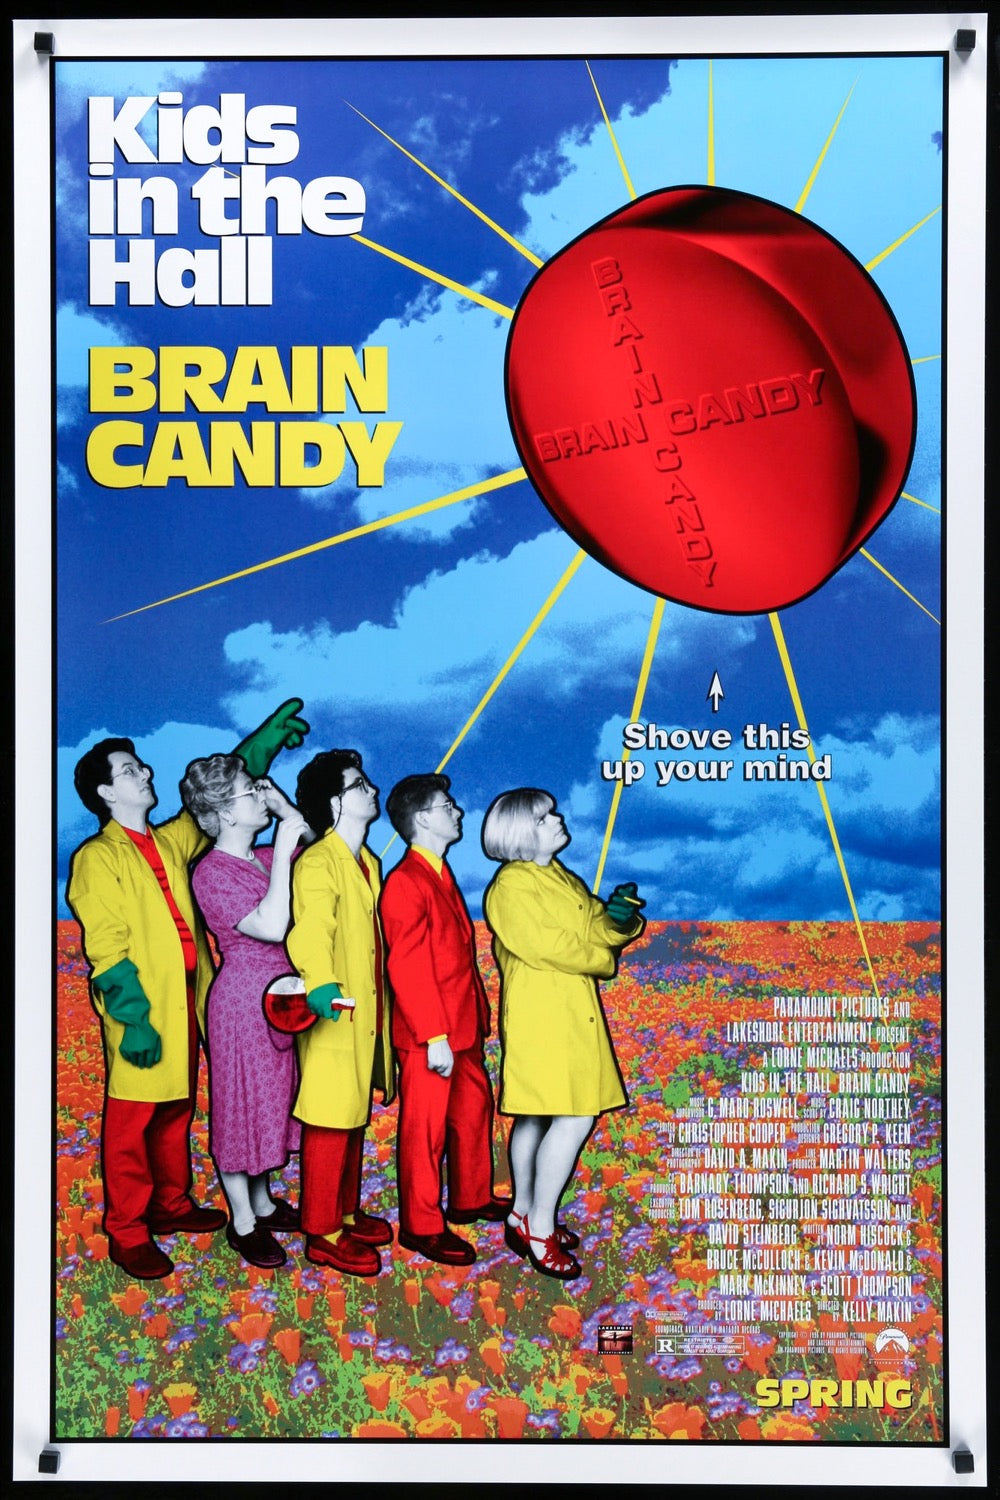 Kids in the Hall: Brain Candy (1996) original movie poster for sale at Original Film Art